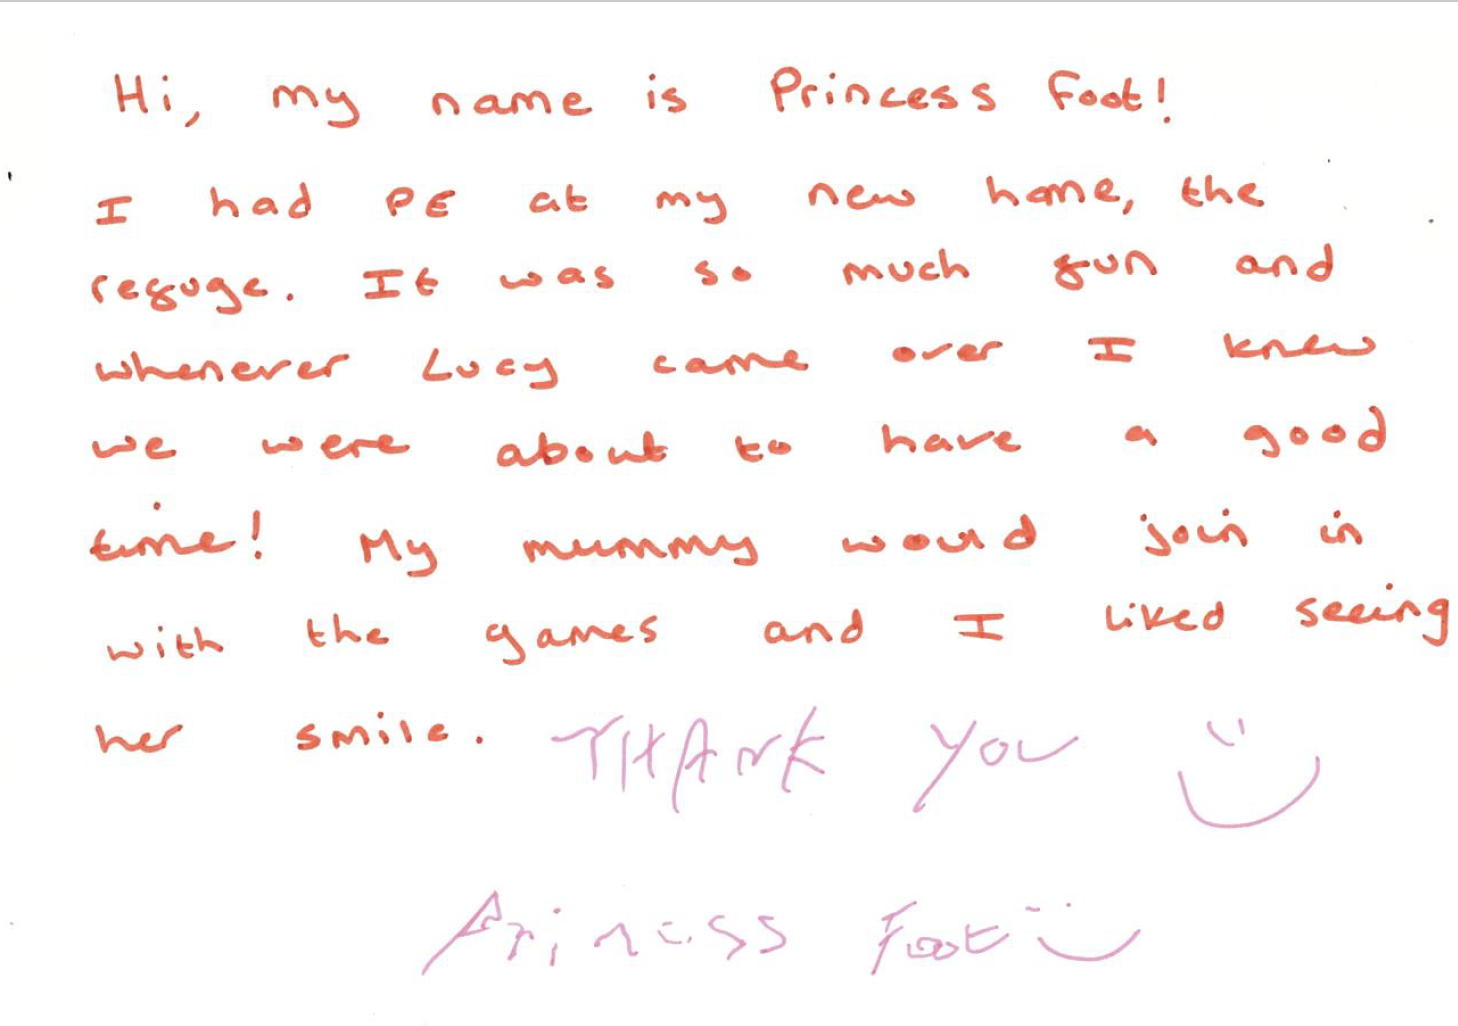 A thank you letter from a child saying she had so much fun doing activities at the refugee and she linked seeing her mum join in and smile